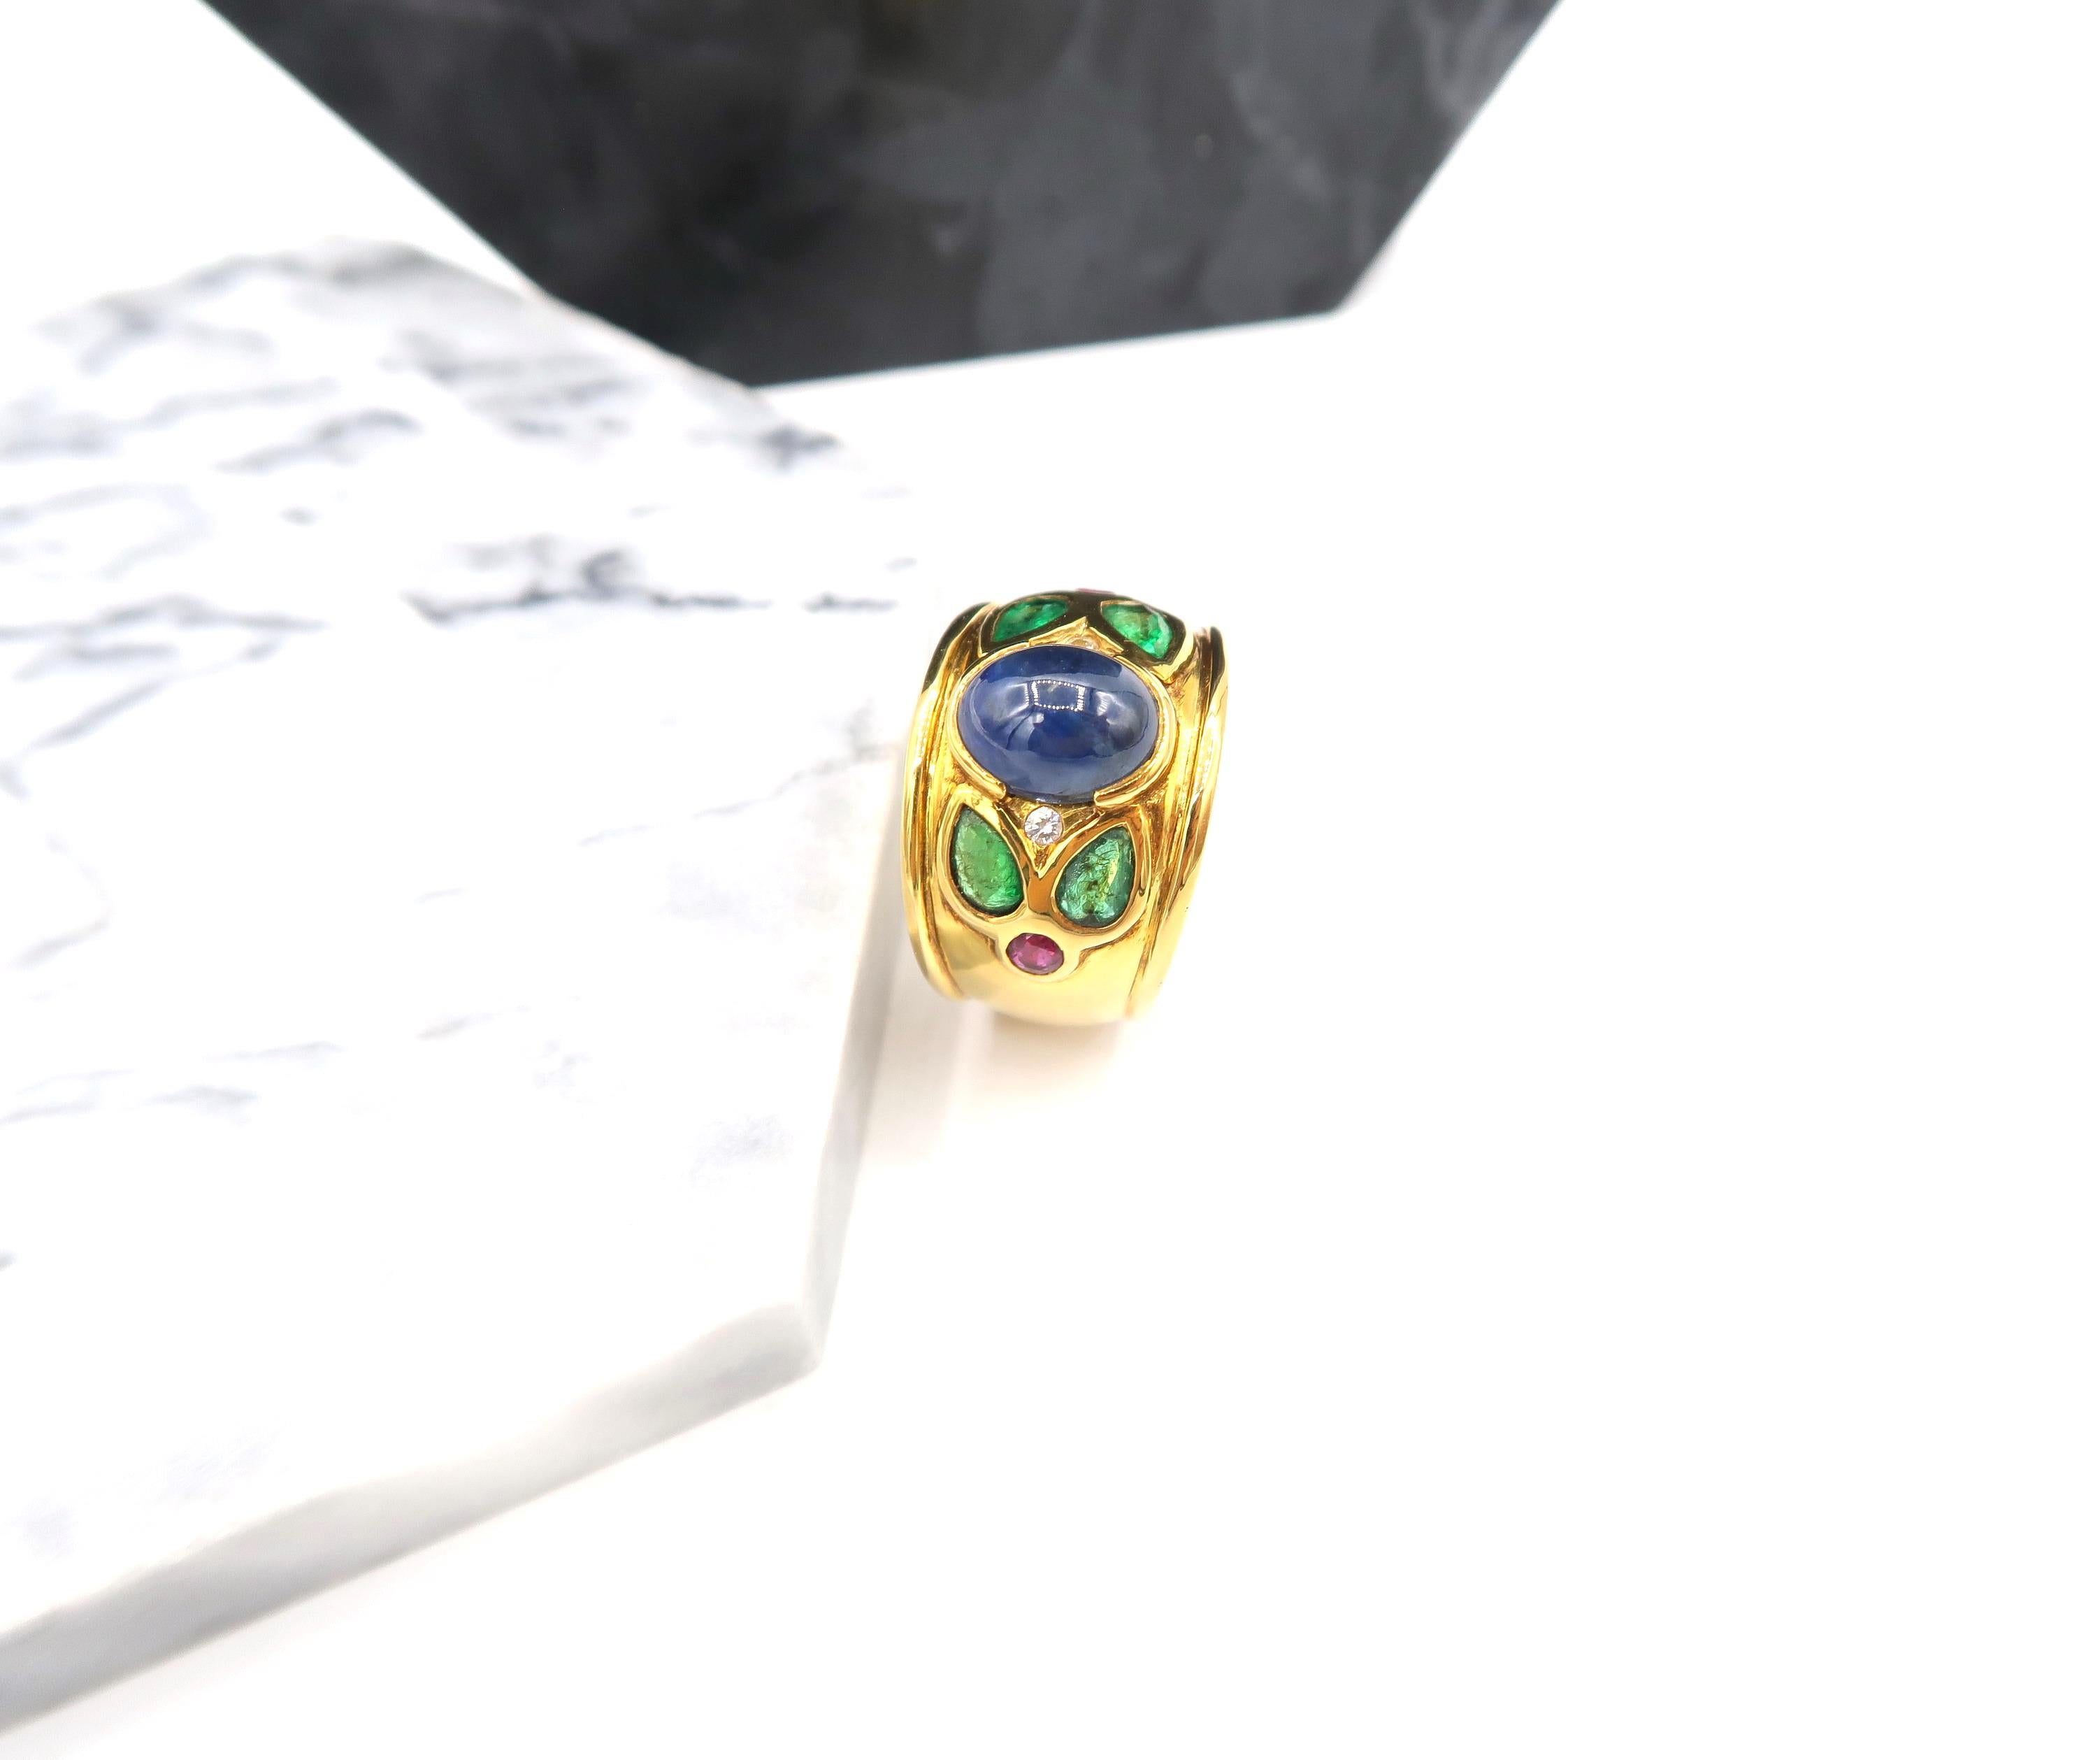 3.48 Carat Cabochon Sapphire 18 Karat Yellow Gold Ring with Diamond, Emerald, Rubies

Please let us know upon checkout should you wish to have the ring resized. 
Ring size: US 7, UK N

Gold: 18K 12.13g.
Diamond: 0.05ct.
Sapphire: 3.58cts.
Emerald: